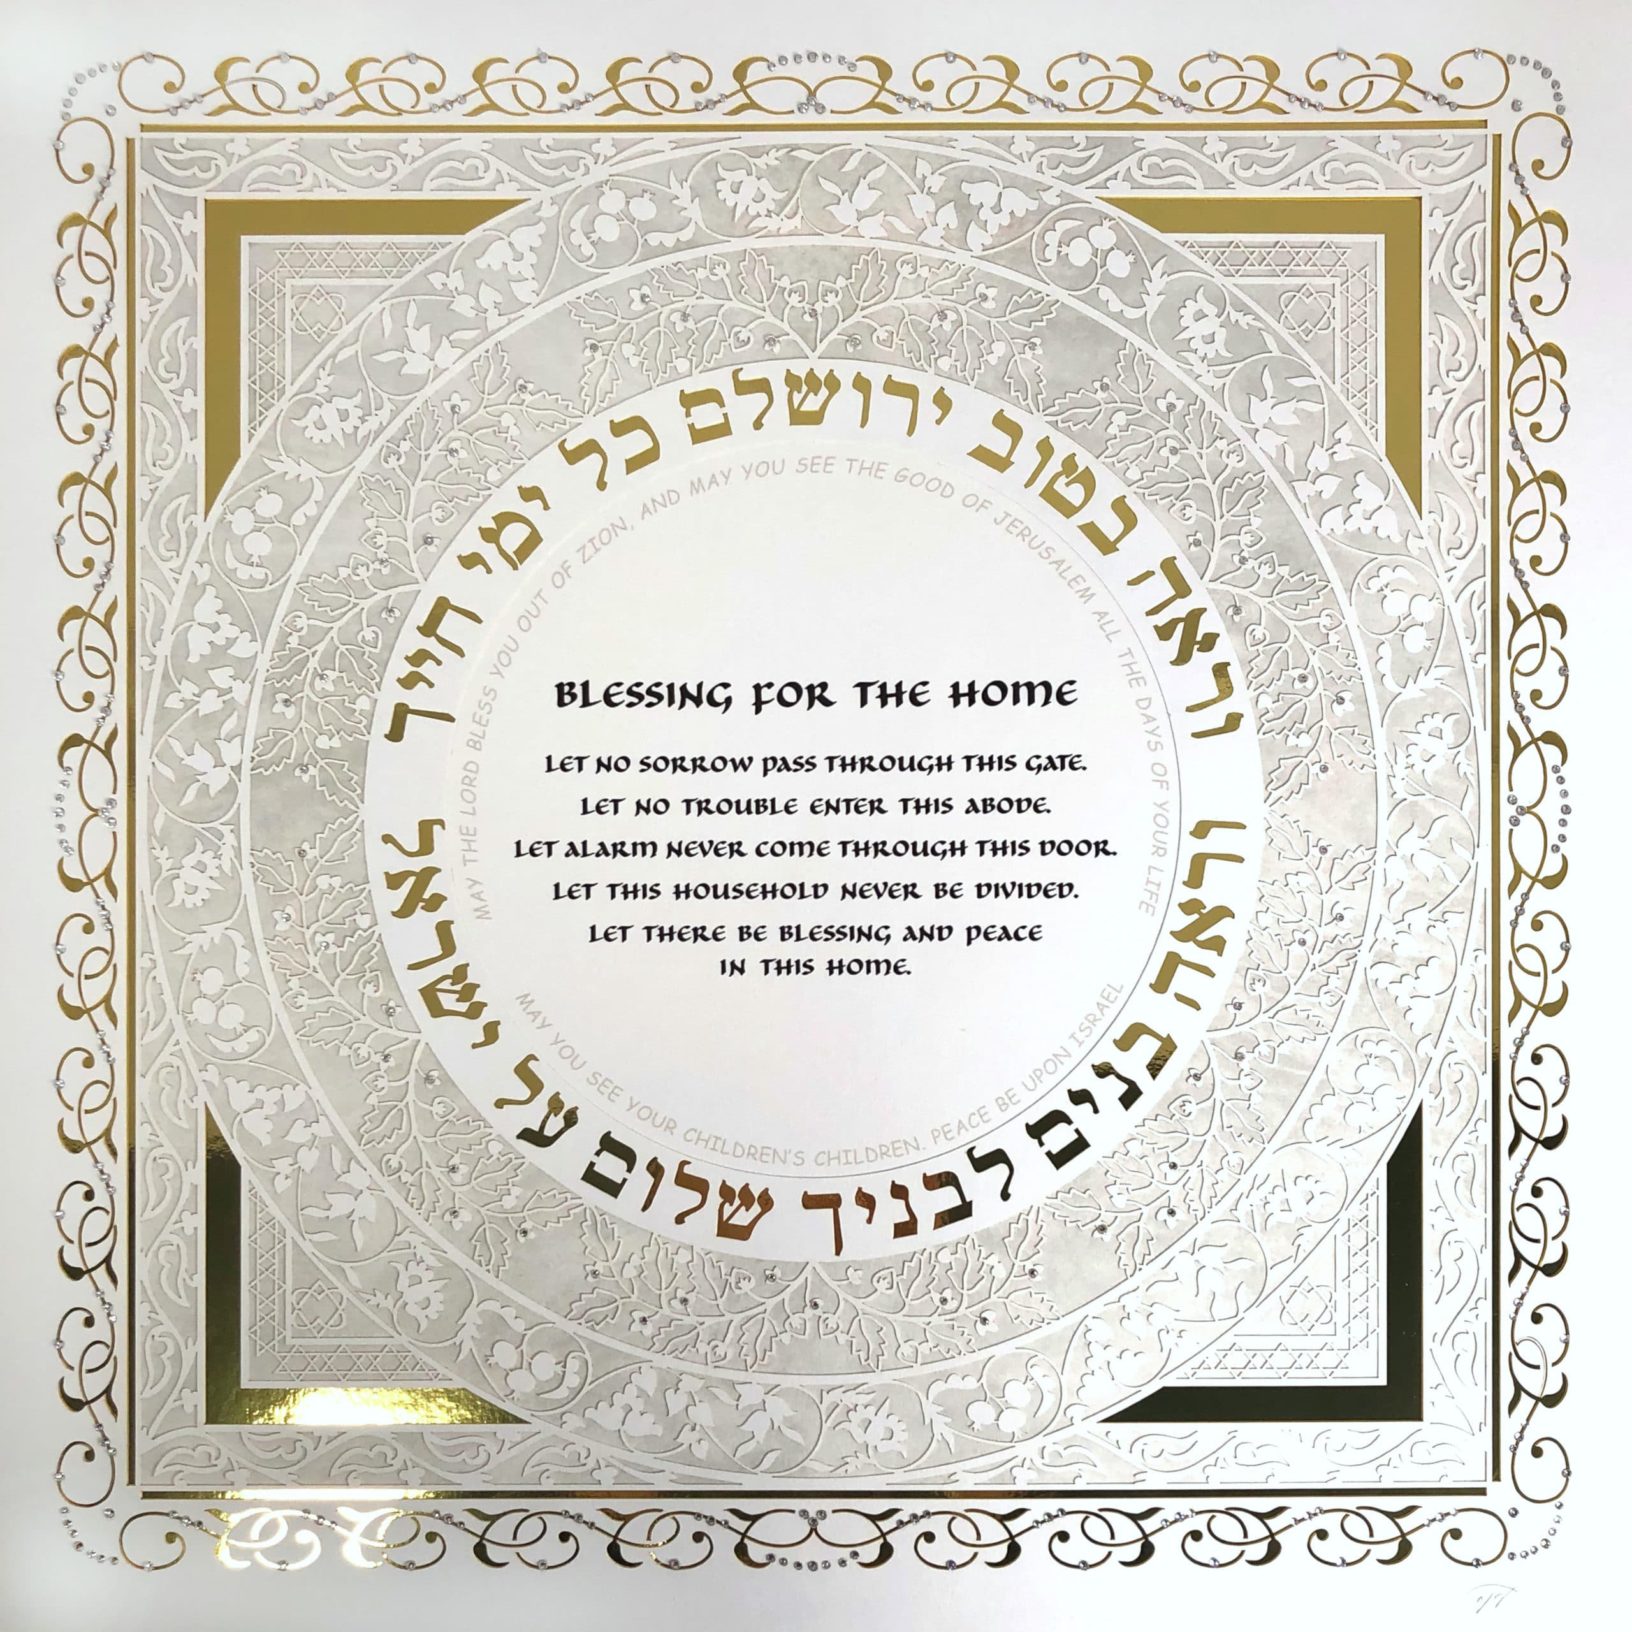 Enya Keshet Luxe Sasson Papercut Luxe Neutral Home Blessings Jewish Marriage Contracts